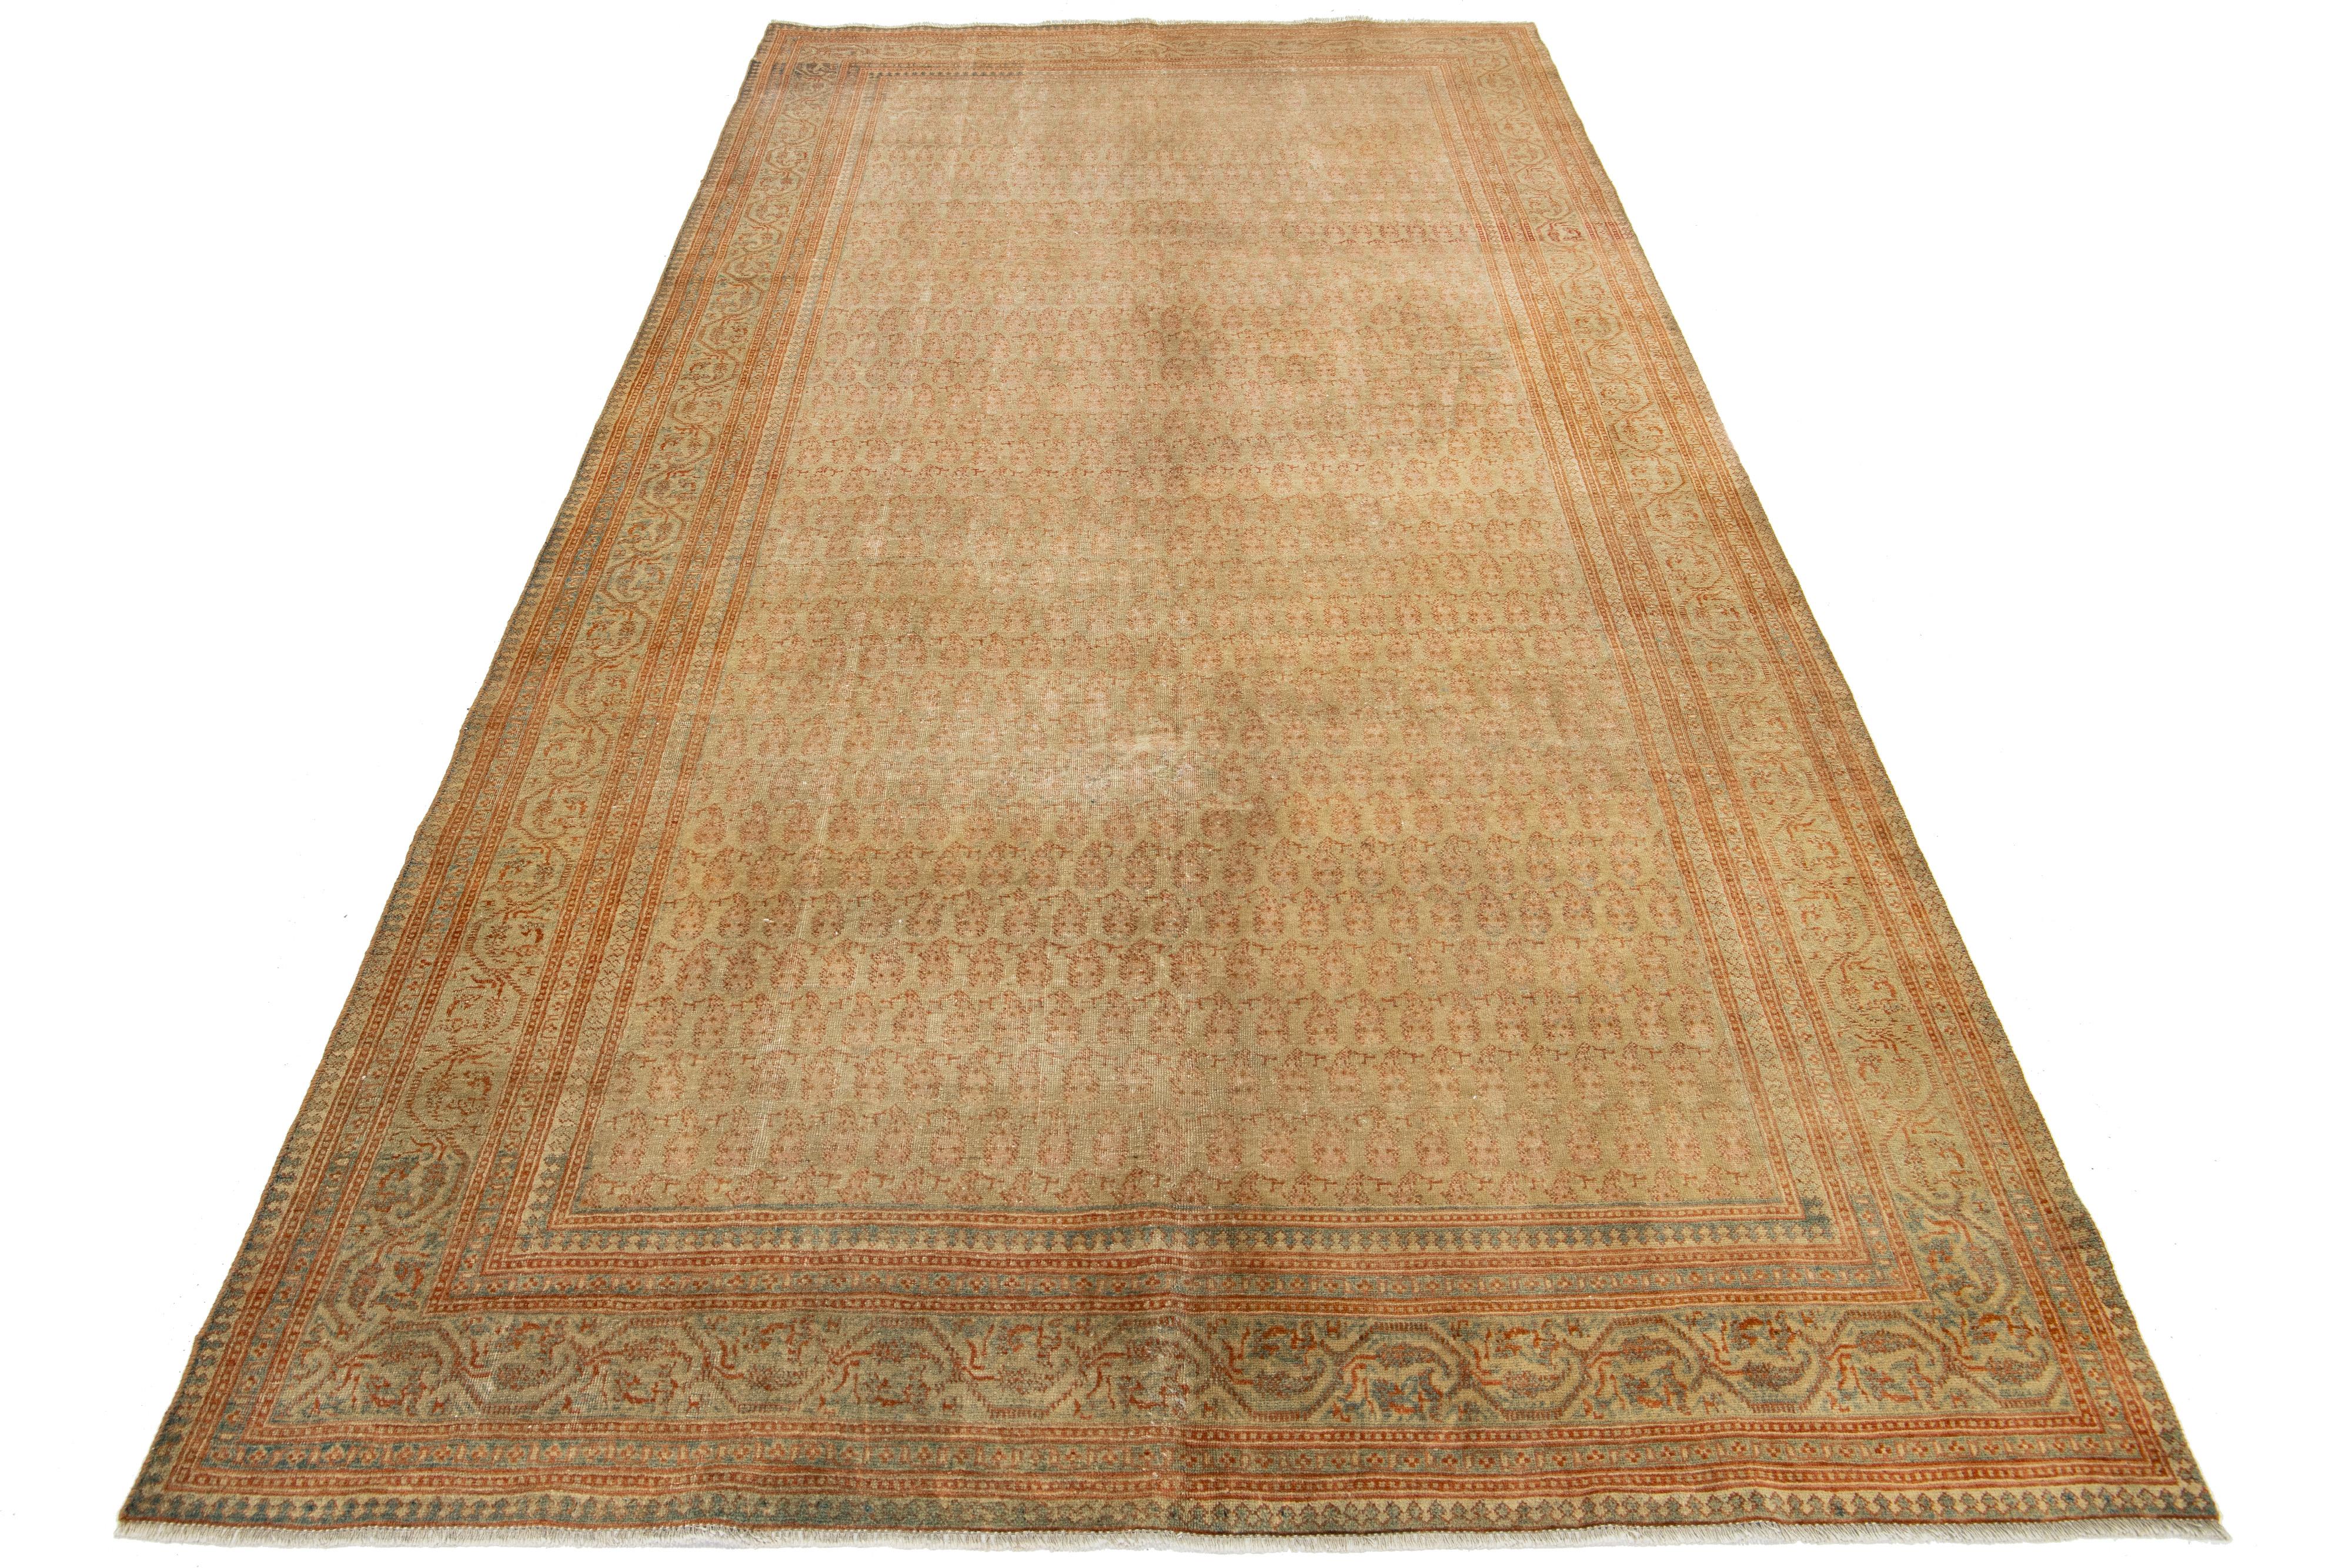 This is a Beautiful Sivas hand-knotted wool rug with a beige-tan field. It has a designed frame and accents in a gorgeous classic boteh pattern. 

This rug measures 5'5